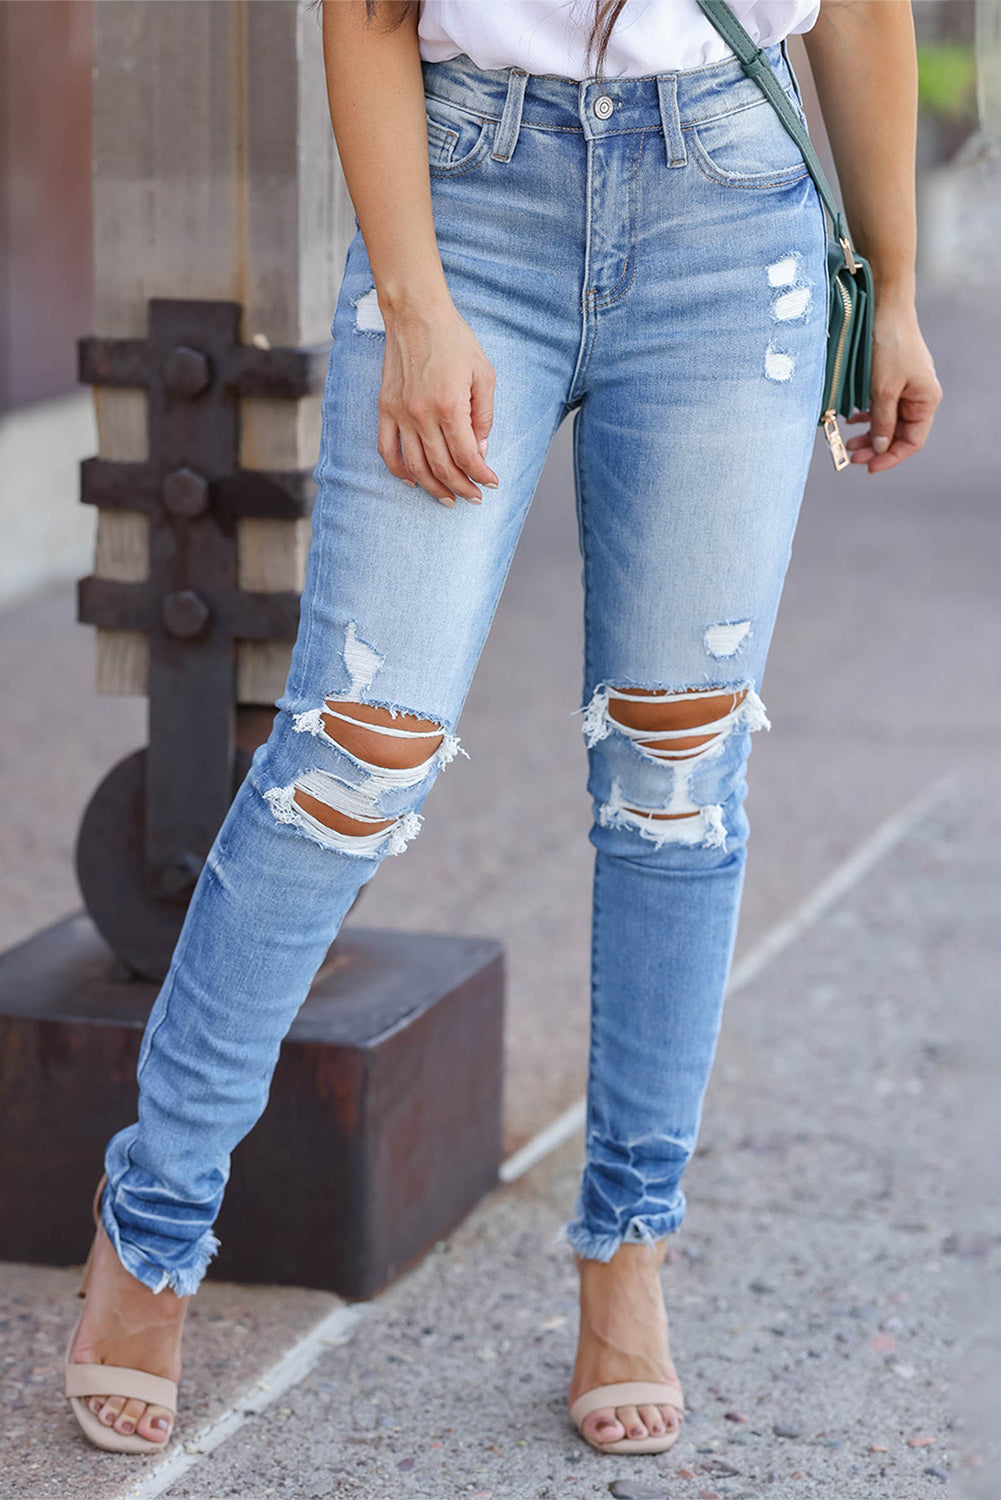 Light Blue 71%Cotton+27.5%Polyester+1.5%Elastane - Light Blue Vintage Distressed Ripped Skinny Jeans - women's jeans at TFC&H Co.